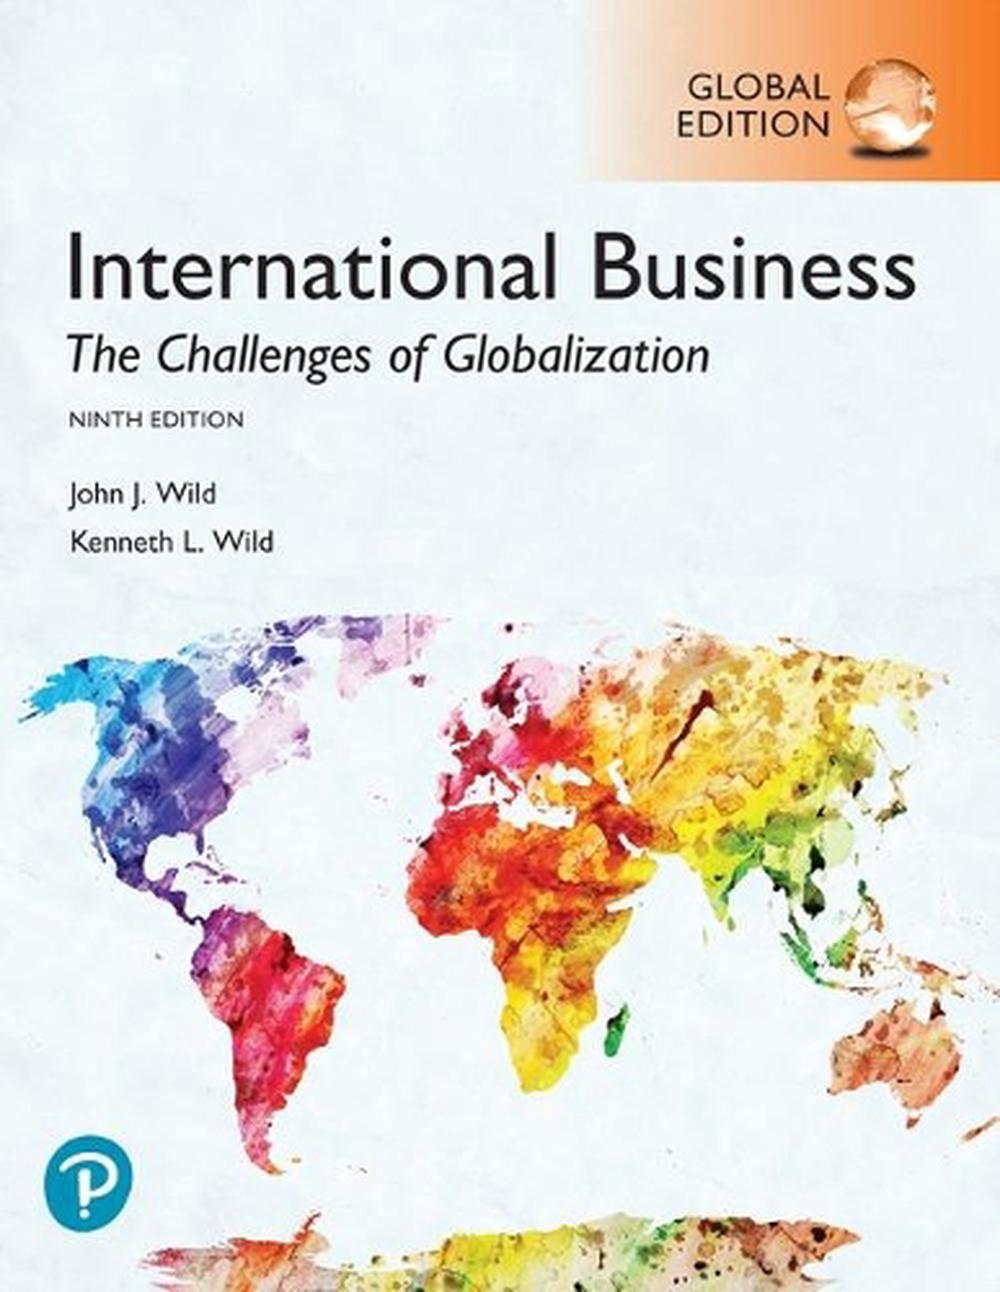 International Business the Challenges of Globalization, Global Edition 9th Edit 9781292262253